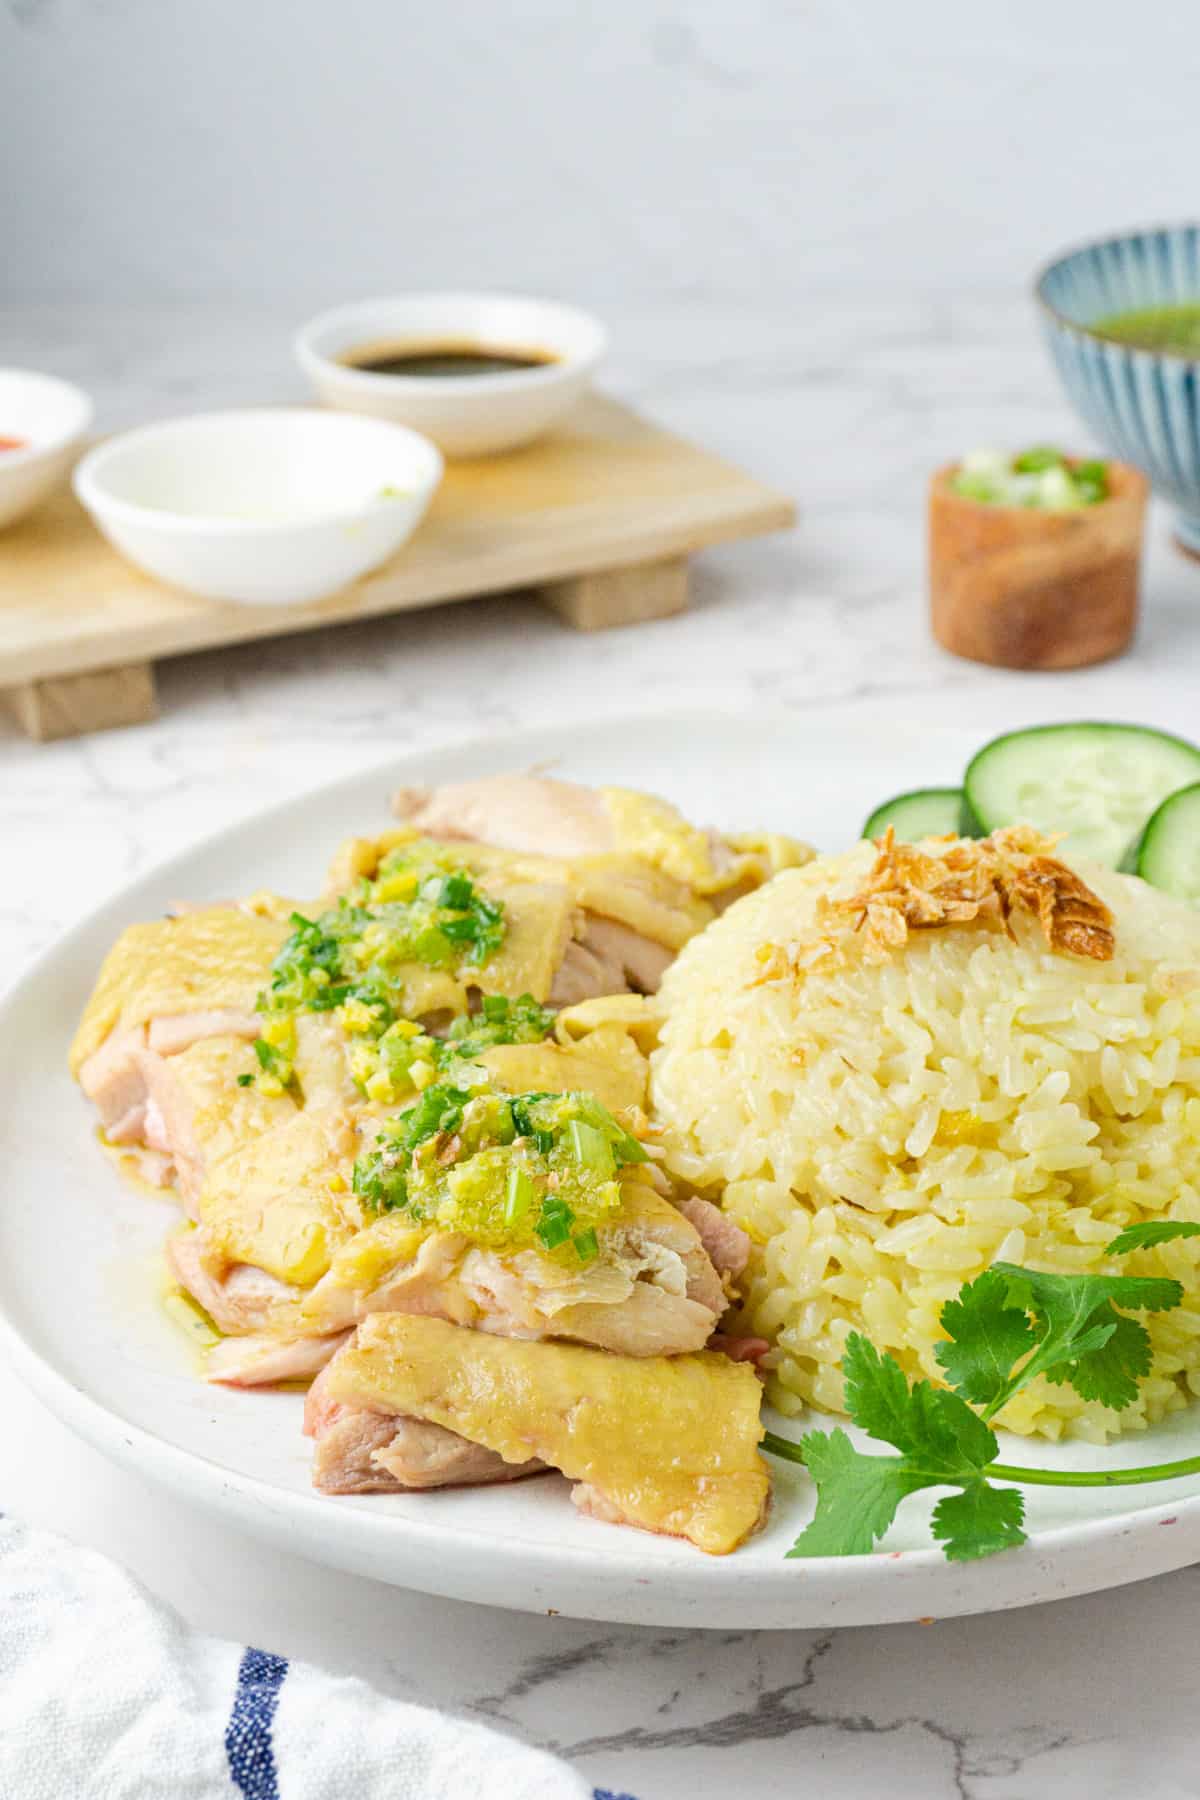 A plate of hainan chicken with rice, garnished with shallot and sauce.